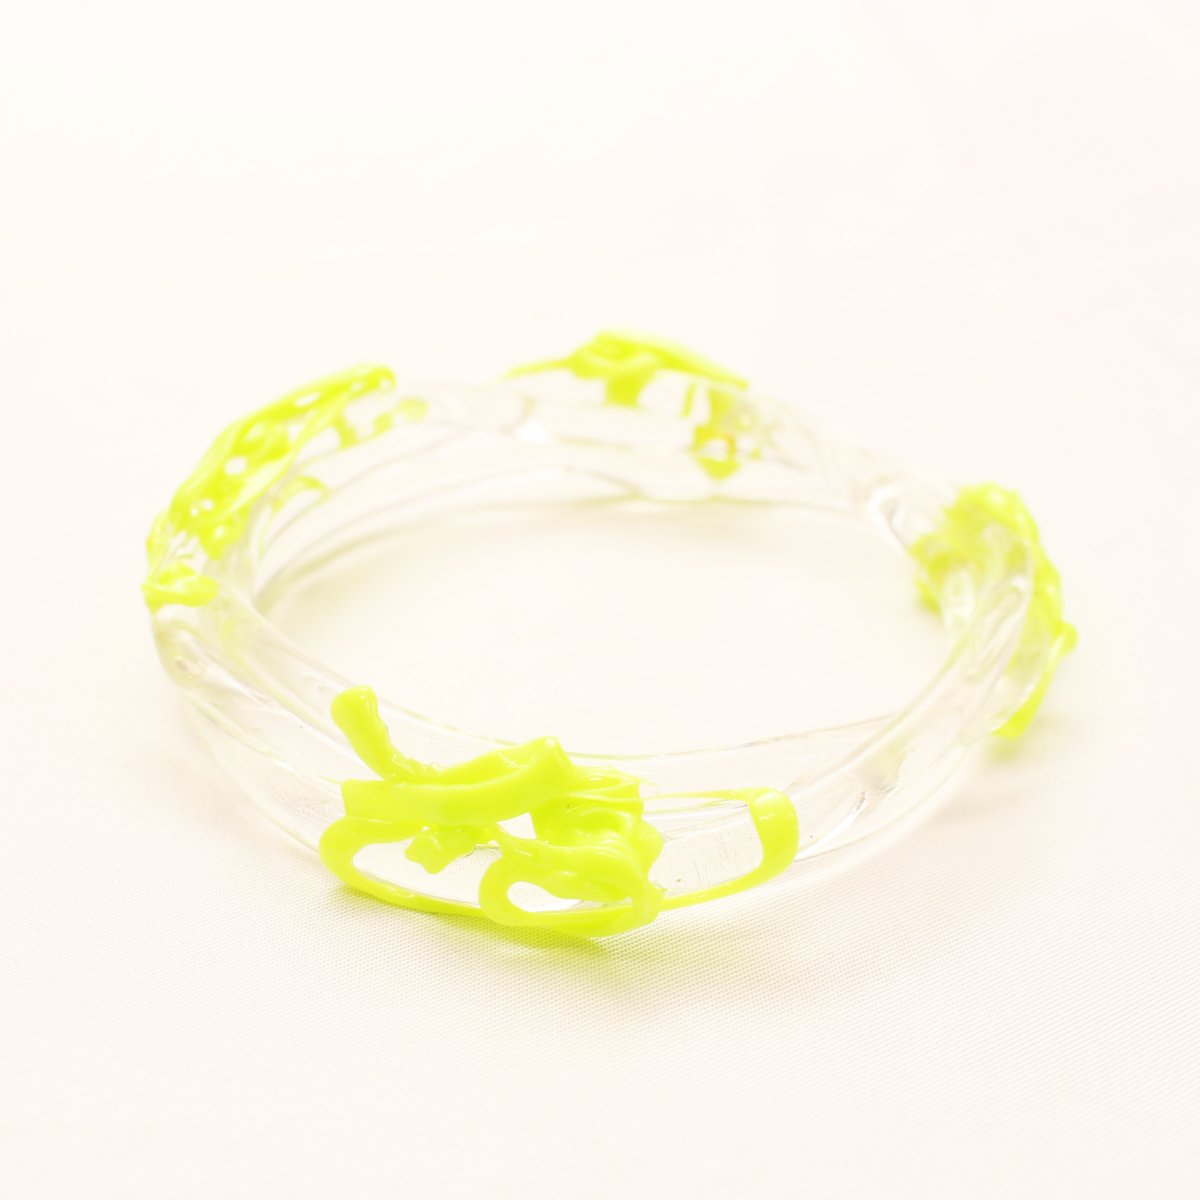  wrist bands【CLEAR×LIME】